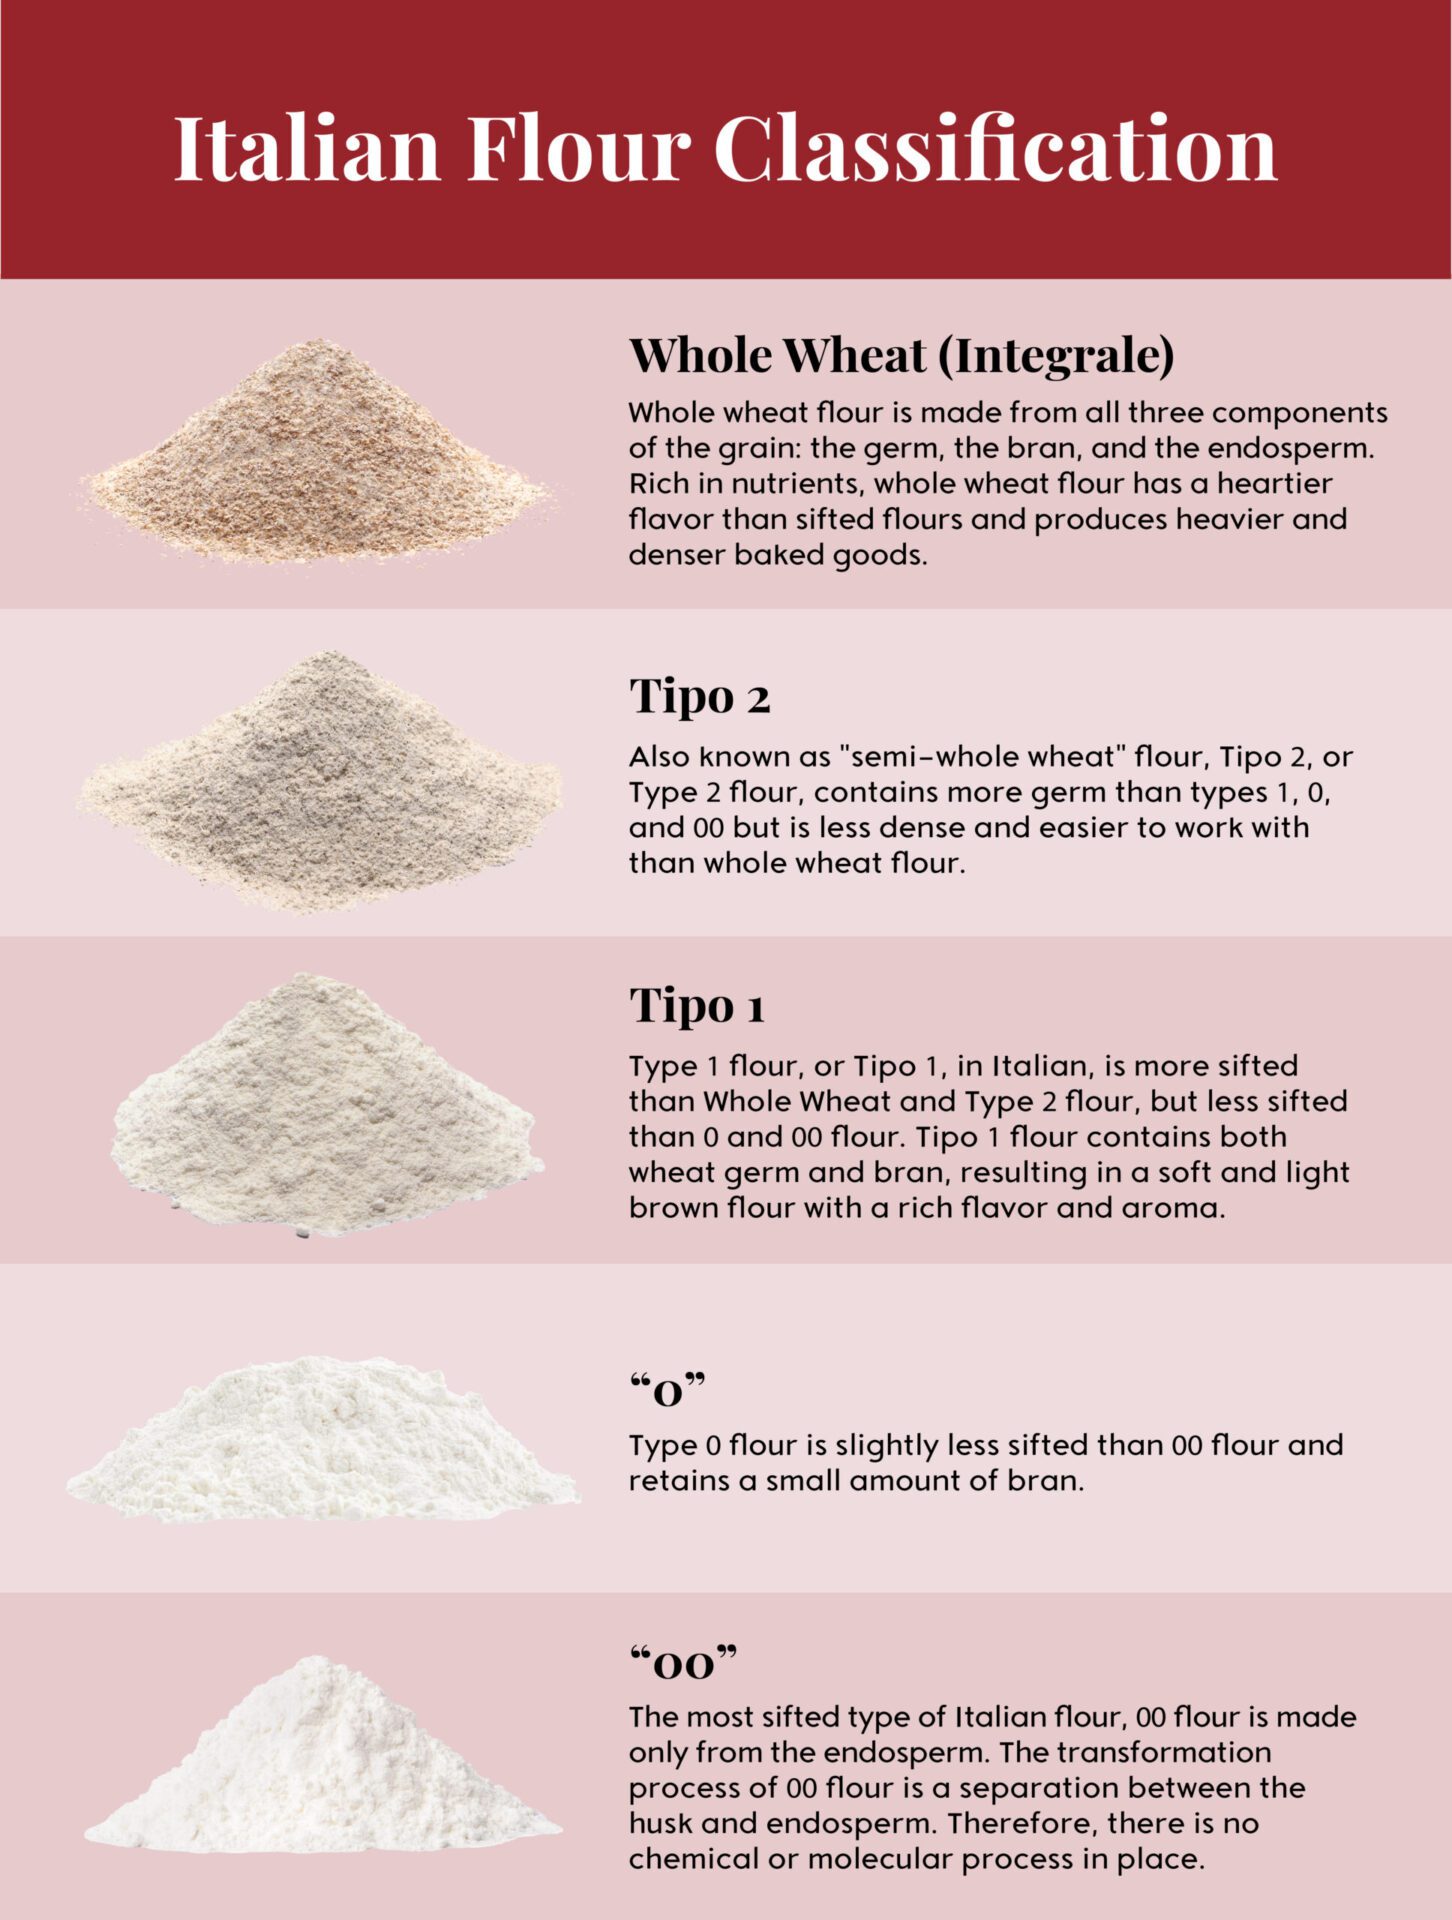 Visual Chart of Italian Flour Classifications From Whole Wheat to 00